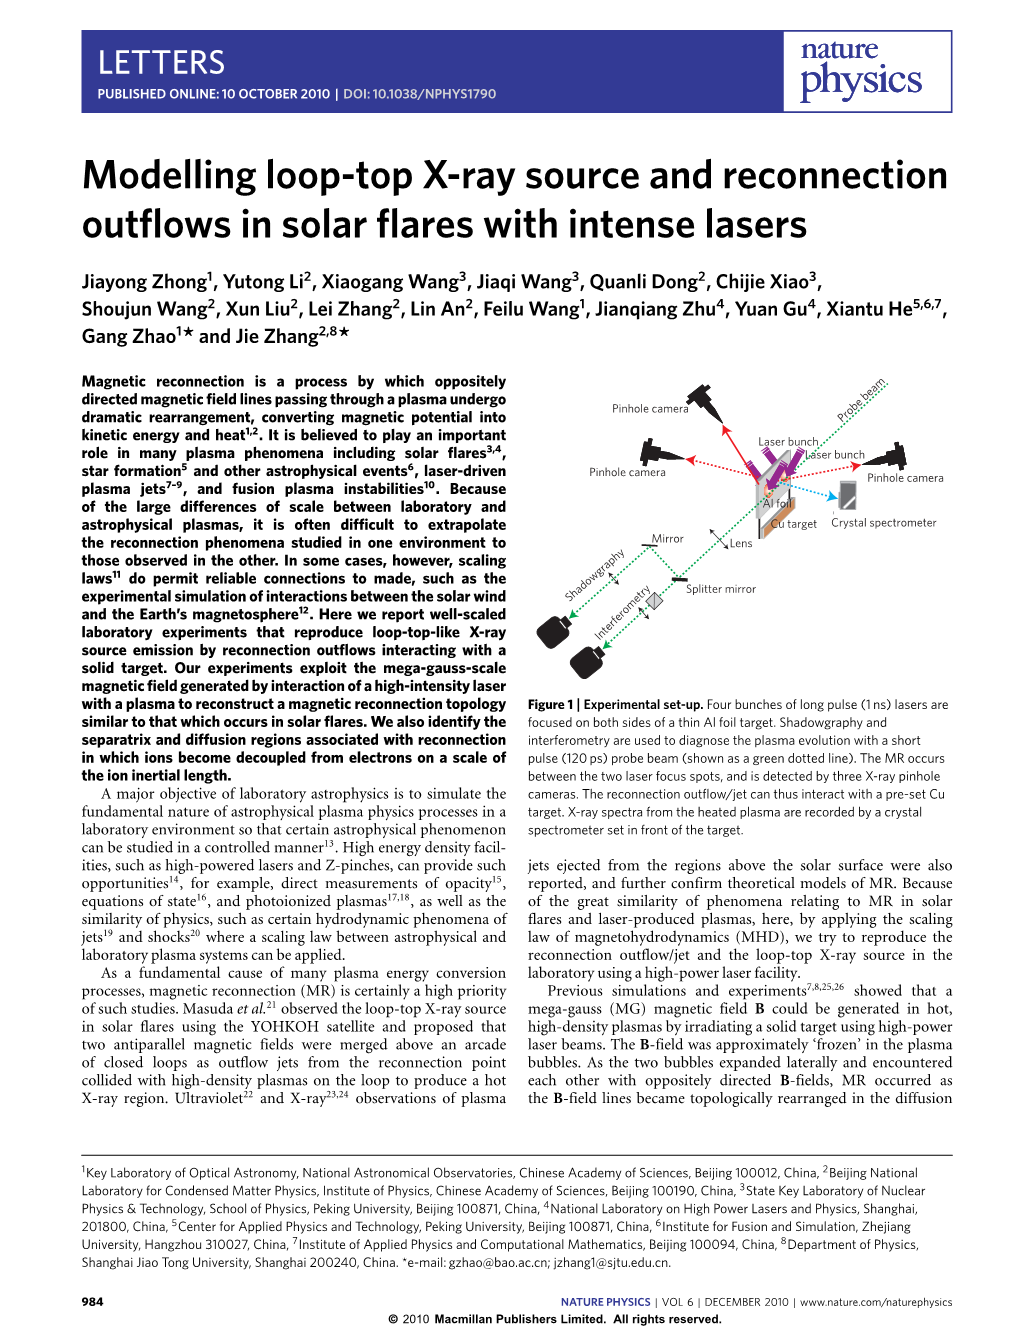 Modelling Loop-Top X-Ray Source and Reconnection Outflows in Solar Flares